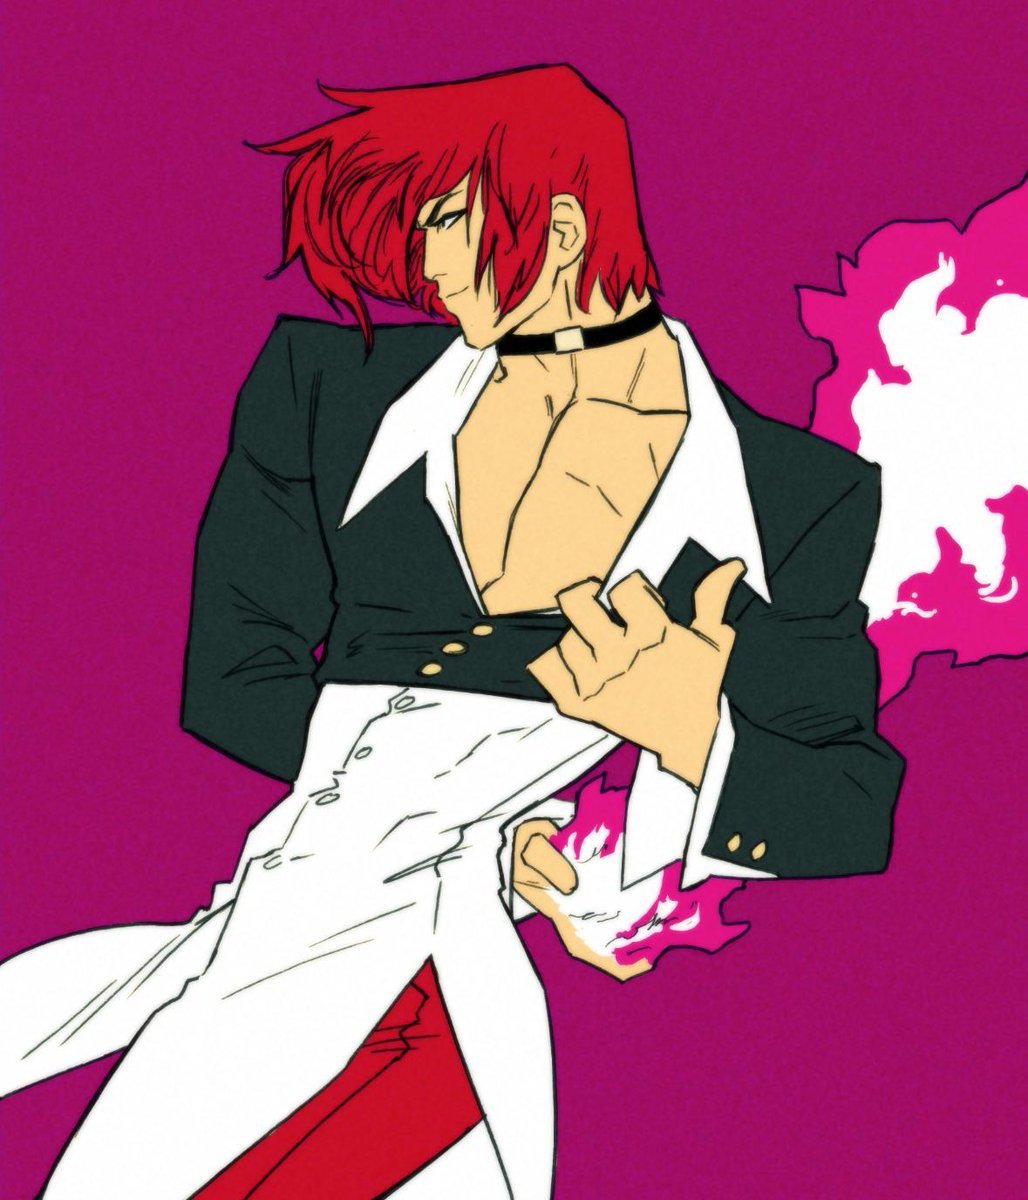 King of Fighters - Yagami Iori by Kris Anka.